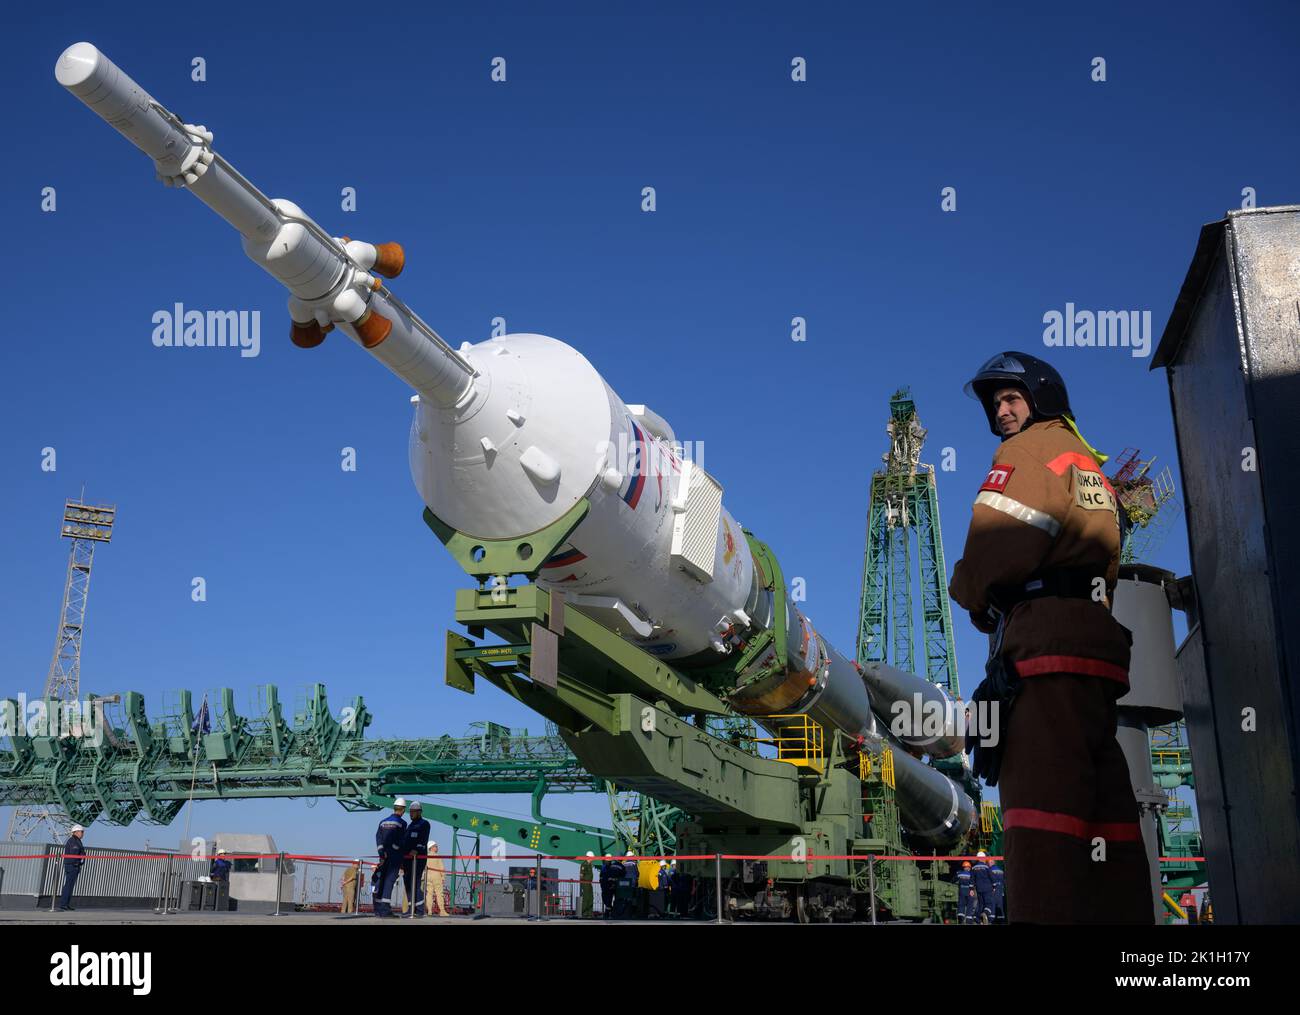 Baikonur, Kazakhstan. 18th Sep, 2022. Russian fire crews watch as the Soyuz MS-22 spacecraft and booster rocket are rolled out by train to launch pad 31 of the Baikonur Cosmodrome, September 18, 2022 in Baikonur, Kazakhstan. International Space Station Expedition 68 crew members astronaut Frank Rubio of NASA, and cosmonauts Sergey Prokopyev and Dmitri Petelin of Roscosmos are set to launch September 21st to the orbiting laboratory. Credit: Bill Ingalls/NASA/Alamy Live News Stock Photo